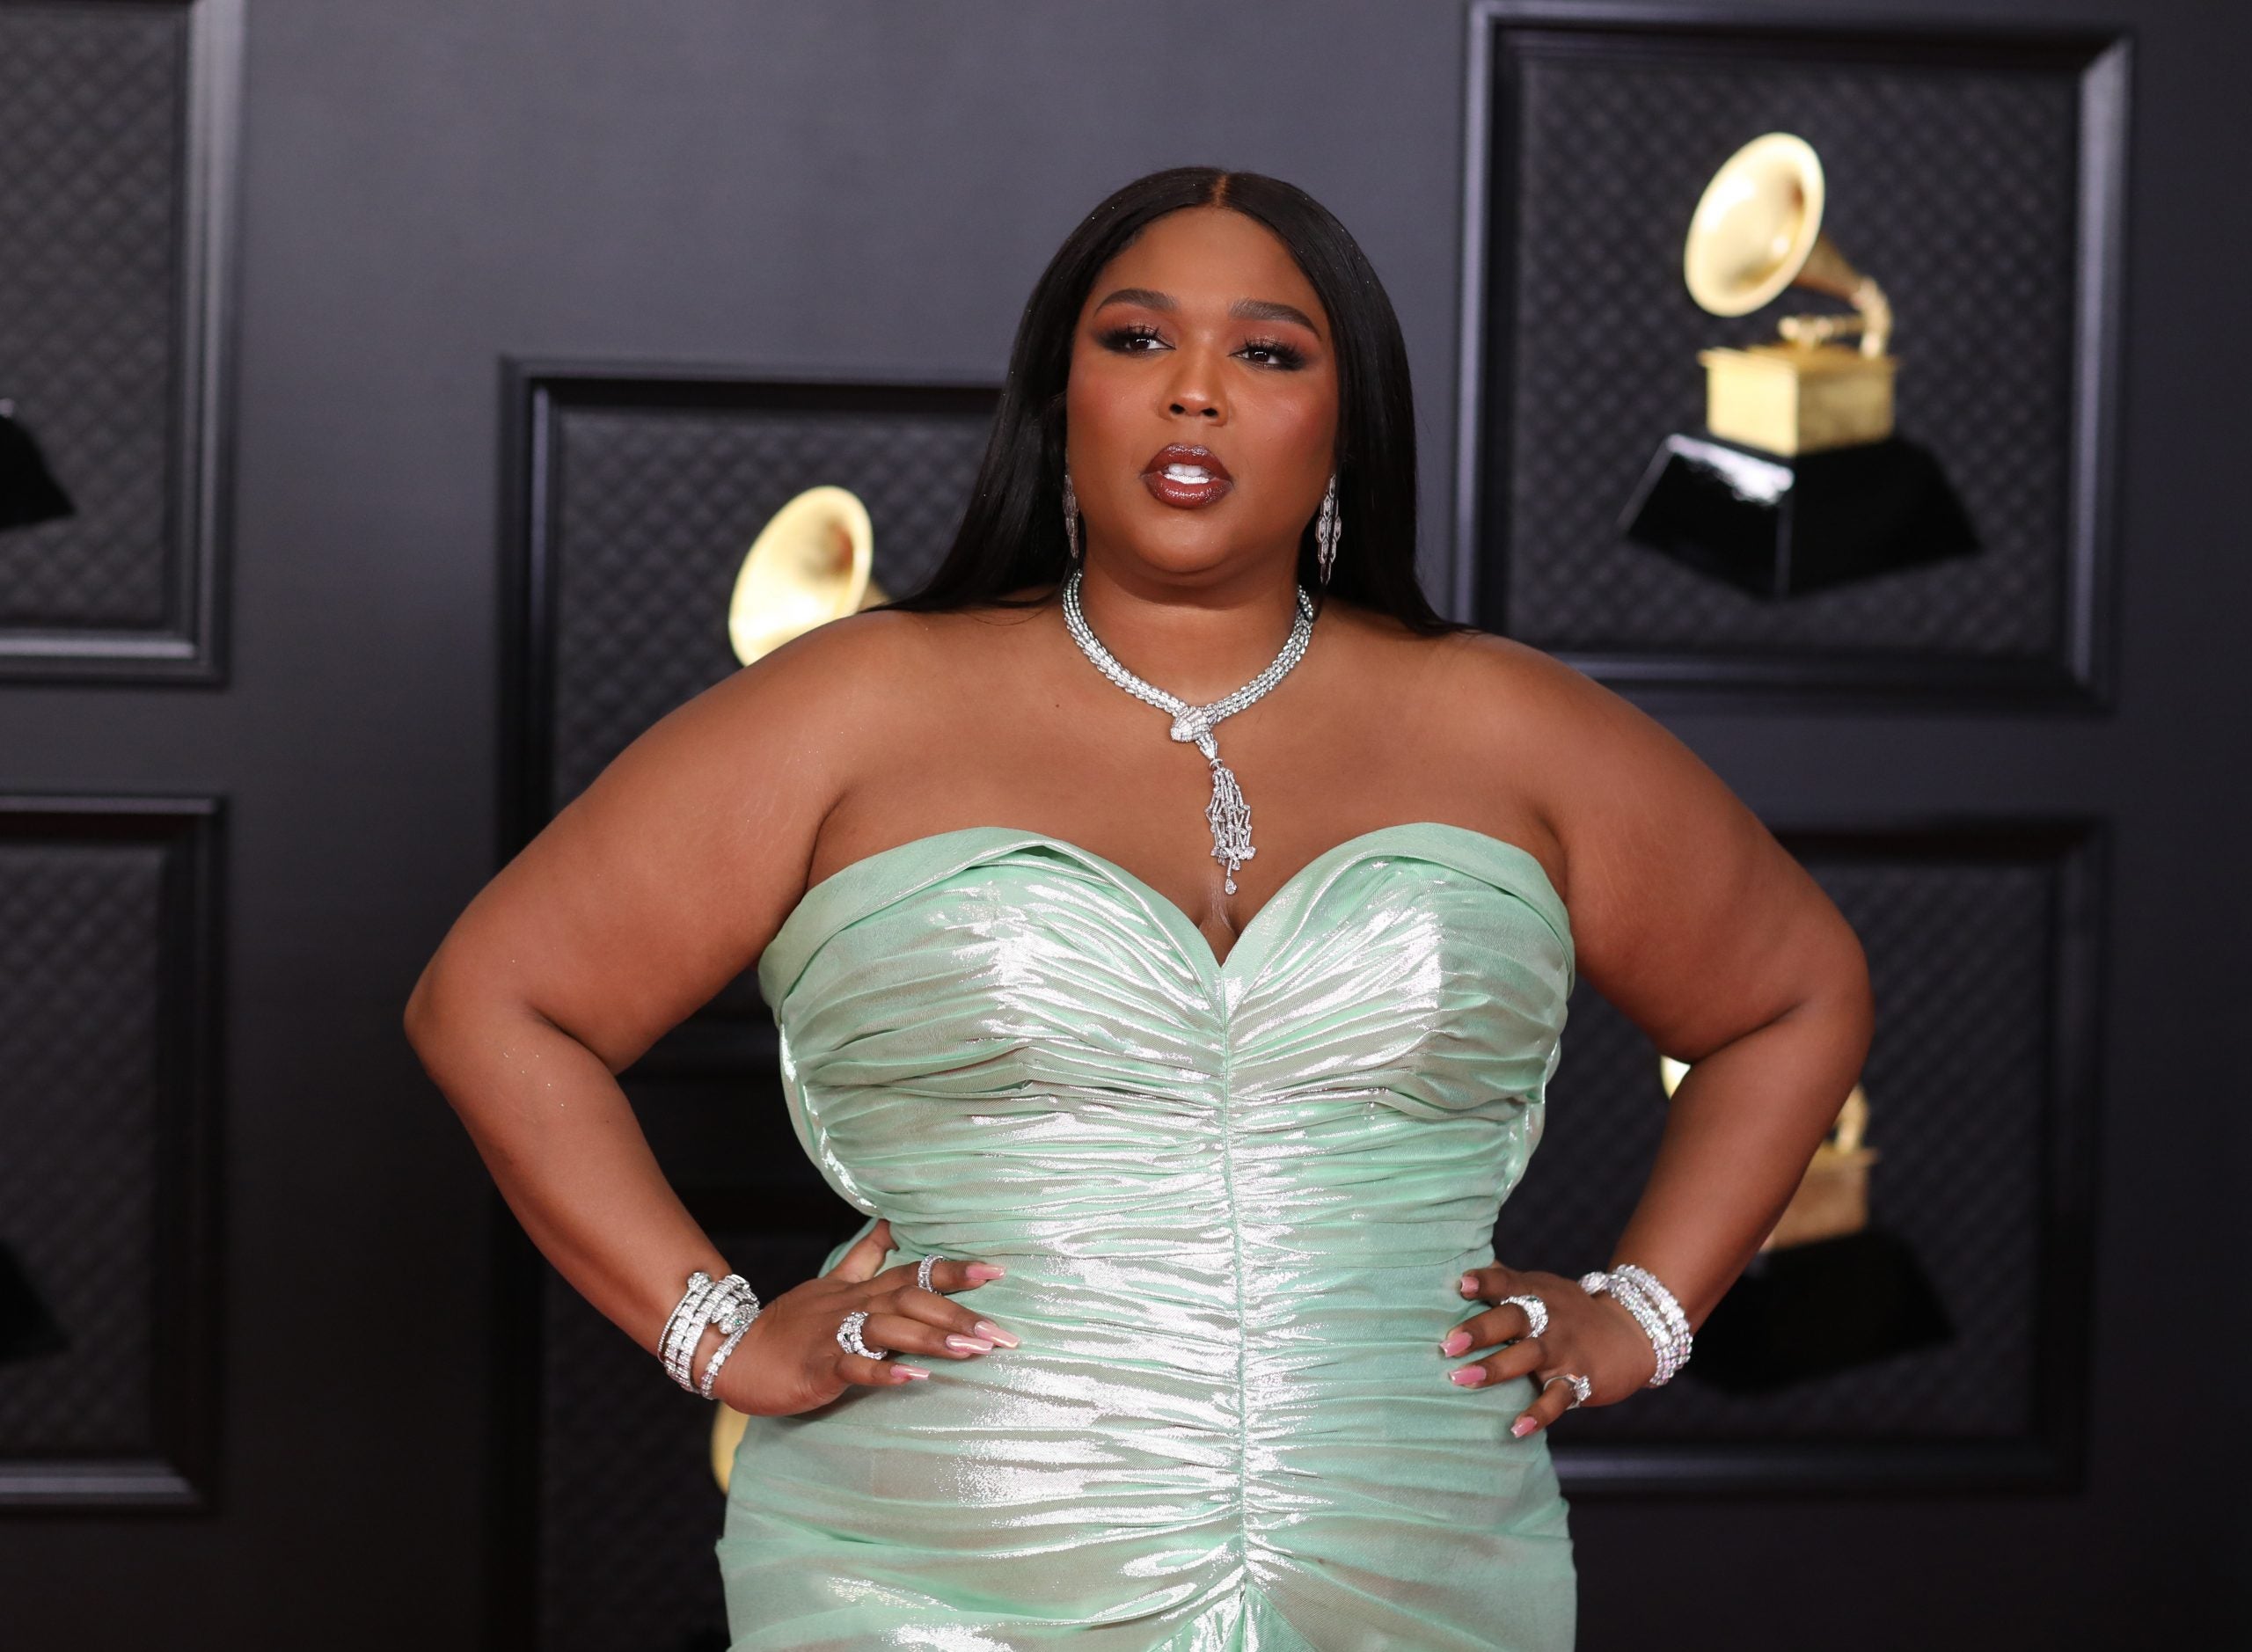 Lizzo Gives A Word On Thin Privilege And The Co-Opting Of The Body